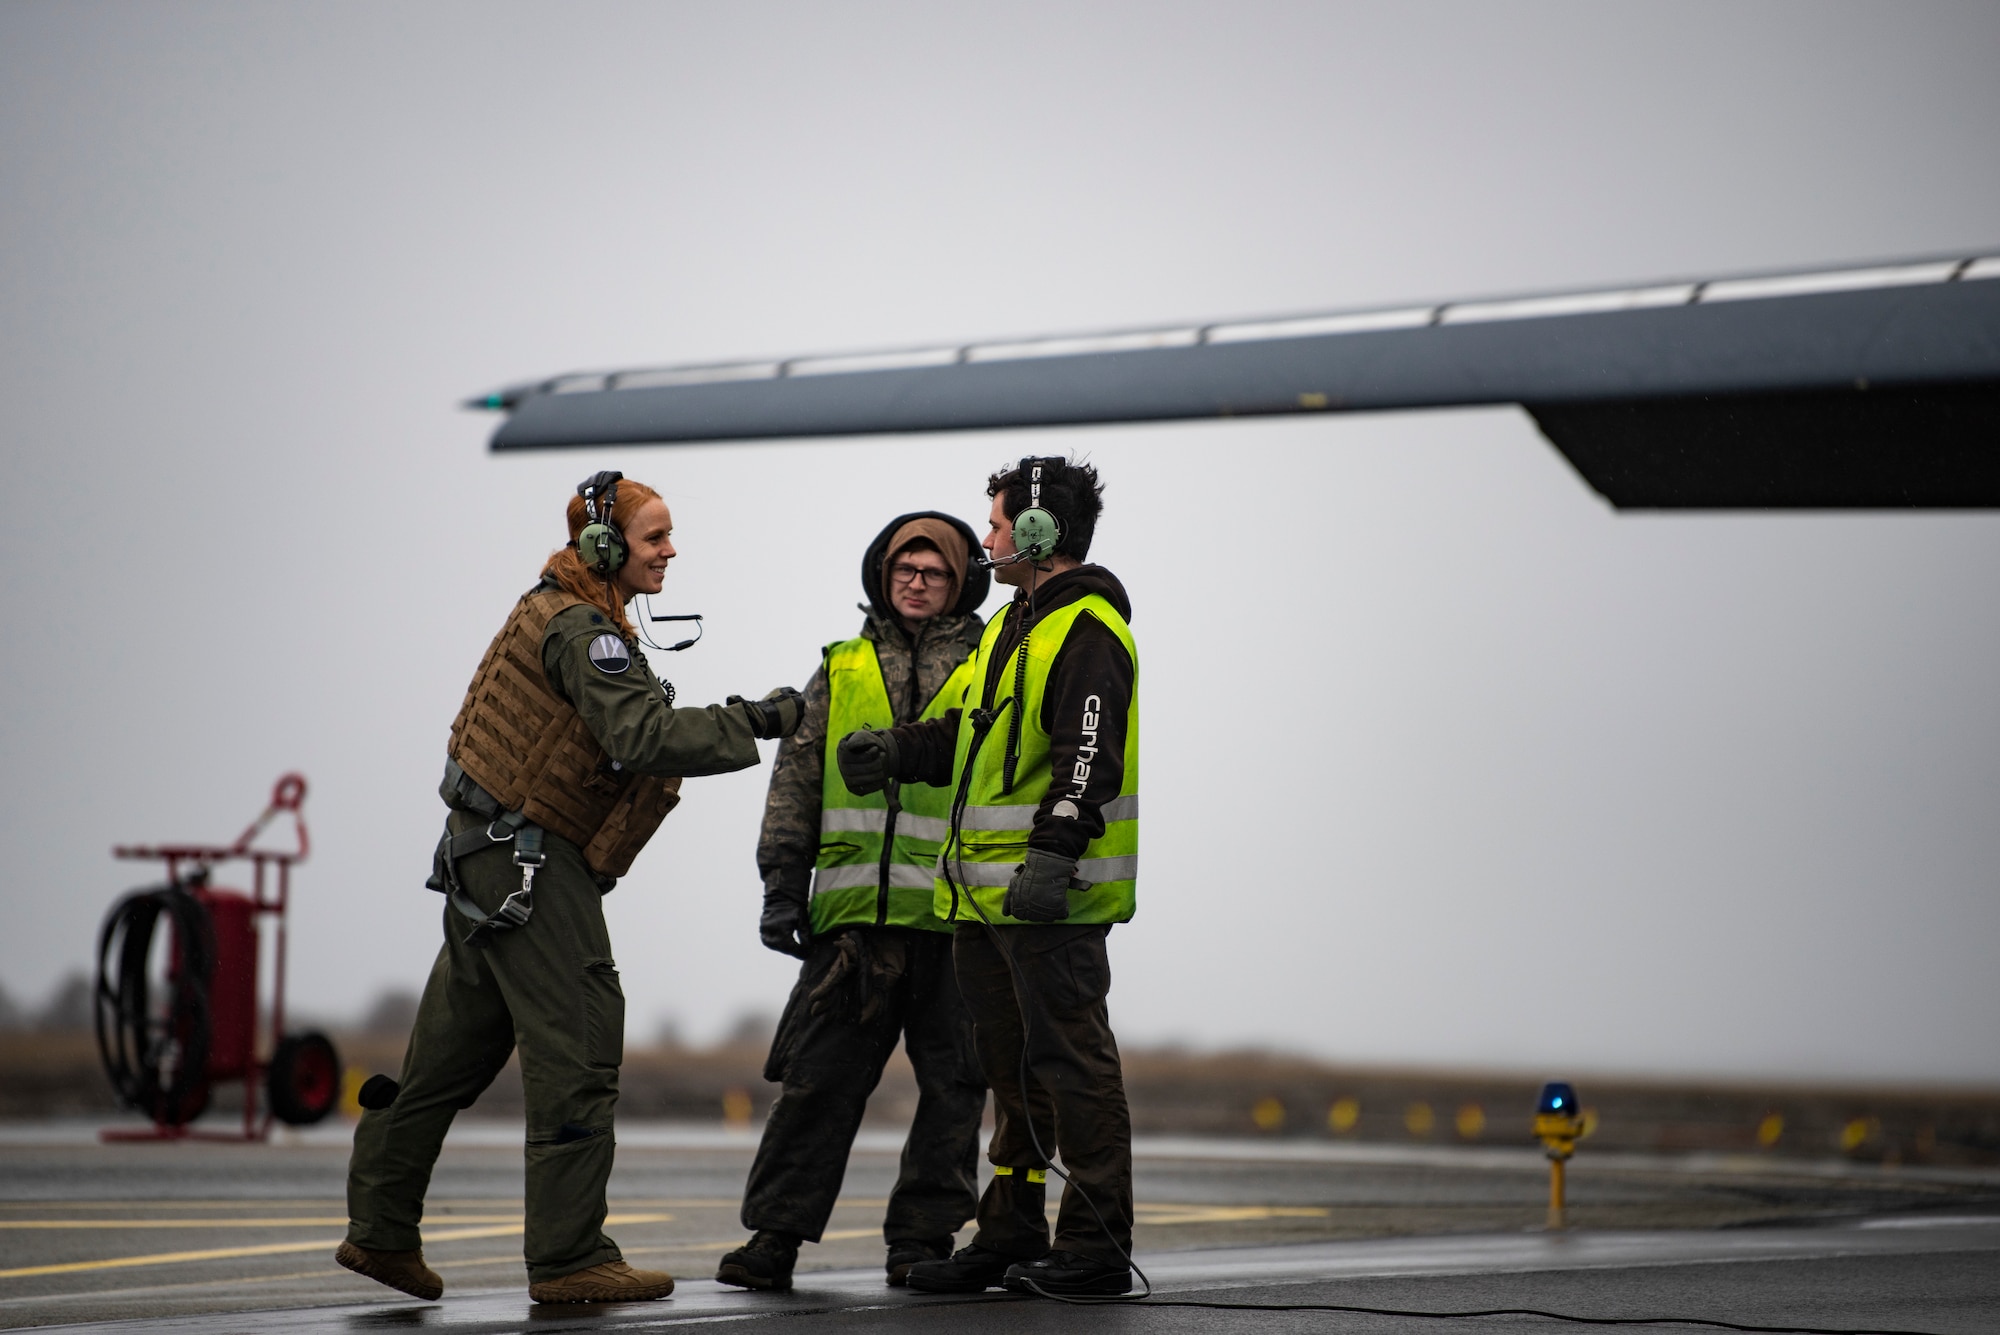 A pilot assigned to the 9th Expeditionary Bomb Squadron greets two crew chiefs at Ørland Air Force Station, Norway, March 23, 2021. Two B-1s participated in Amalgam Dart, a joint integration training mission consisting of a series of potential real-world scenarios designed to bolster U.S. aerospace warning and defense readiness. (U.S. Air Force photo by Airman 1st Class Colin Hollowell)